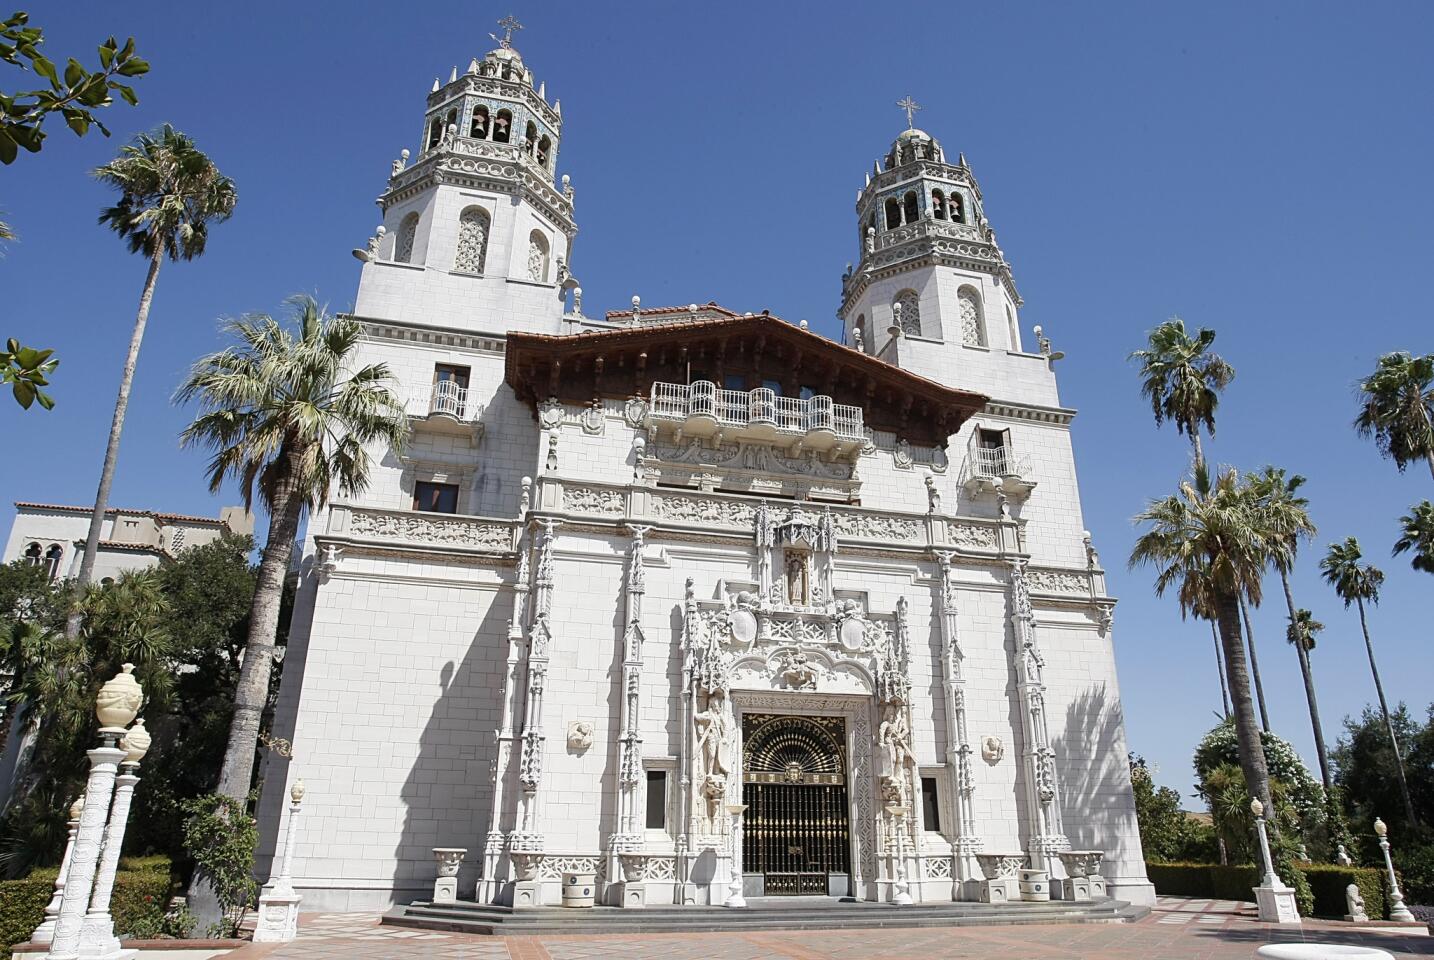 Fifty-six bedrooms, 61 bathrooms, 41 fireplaces, two pools and 90,080 square feet. Owned by the state since William Randolph Hearst's Hearst Corp. donated it in 1957, the Castle has been open for tours since 1958.